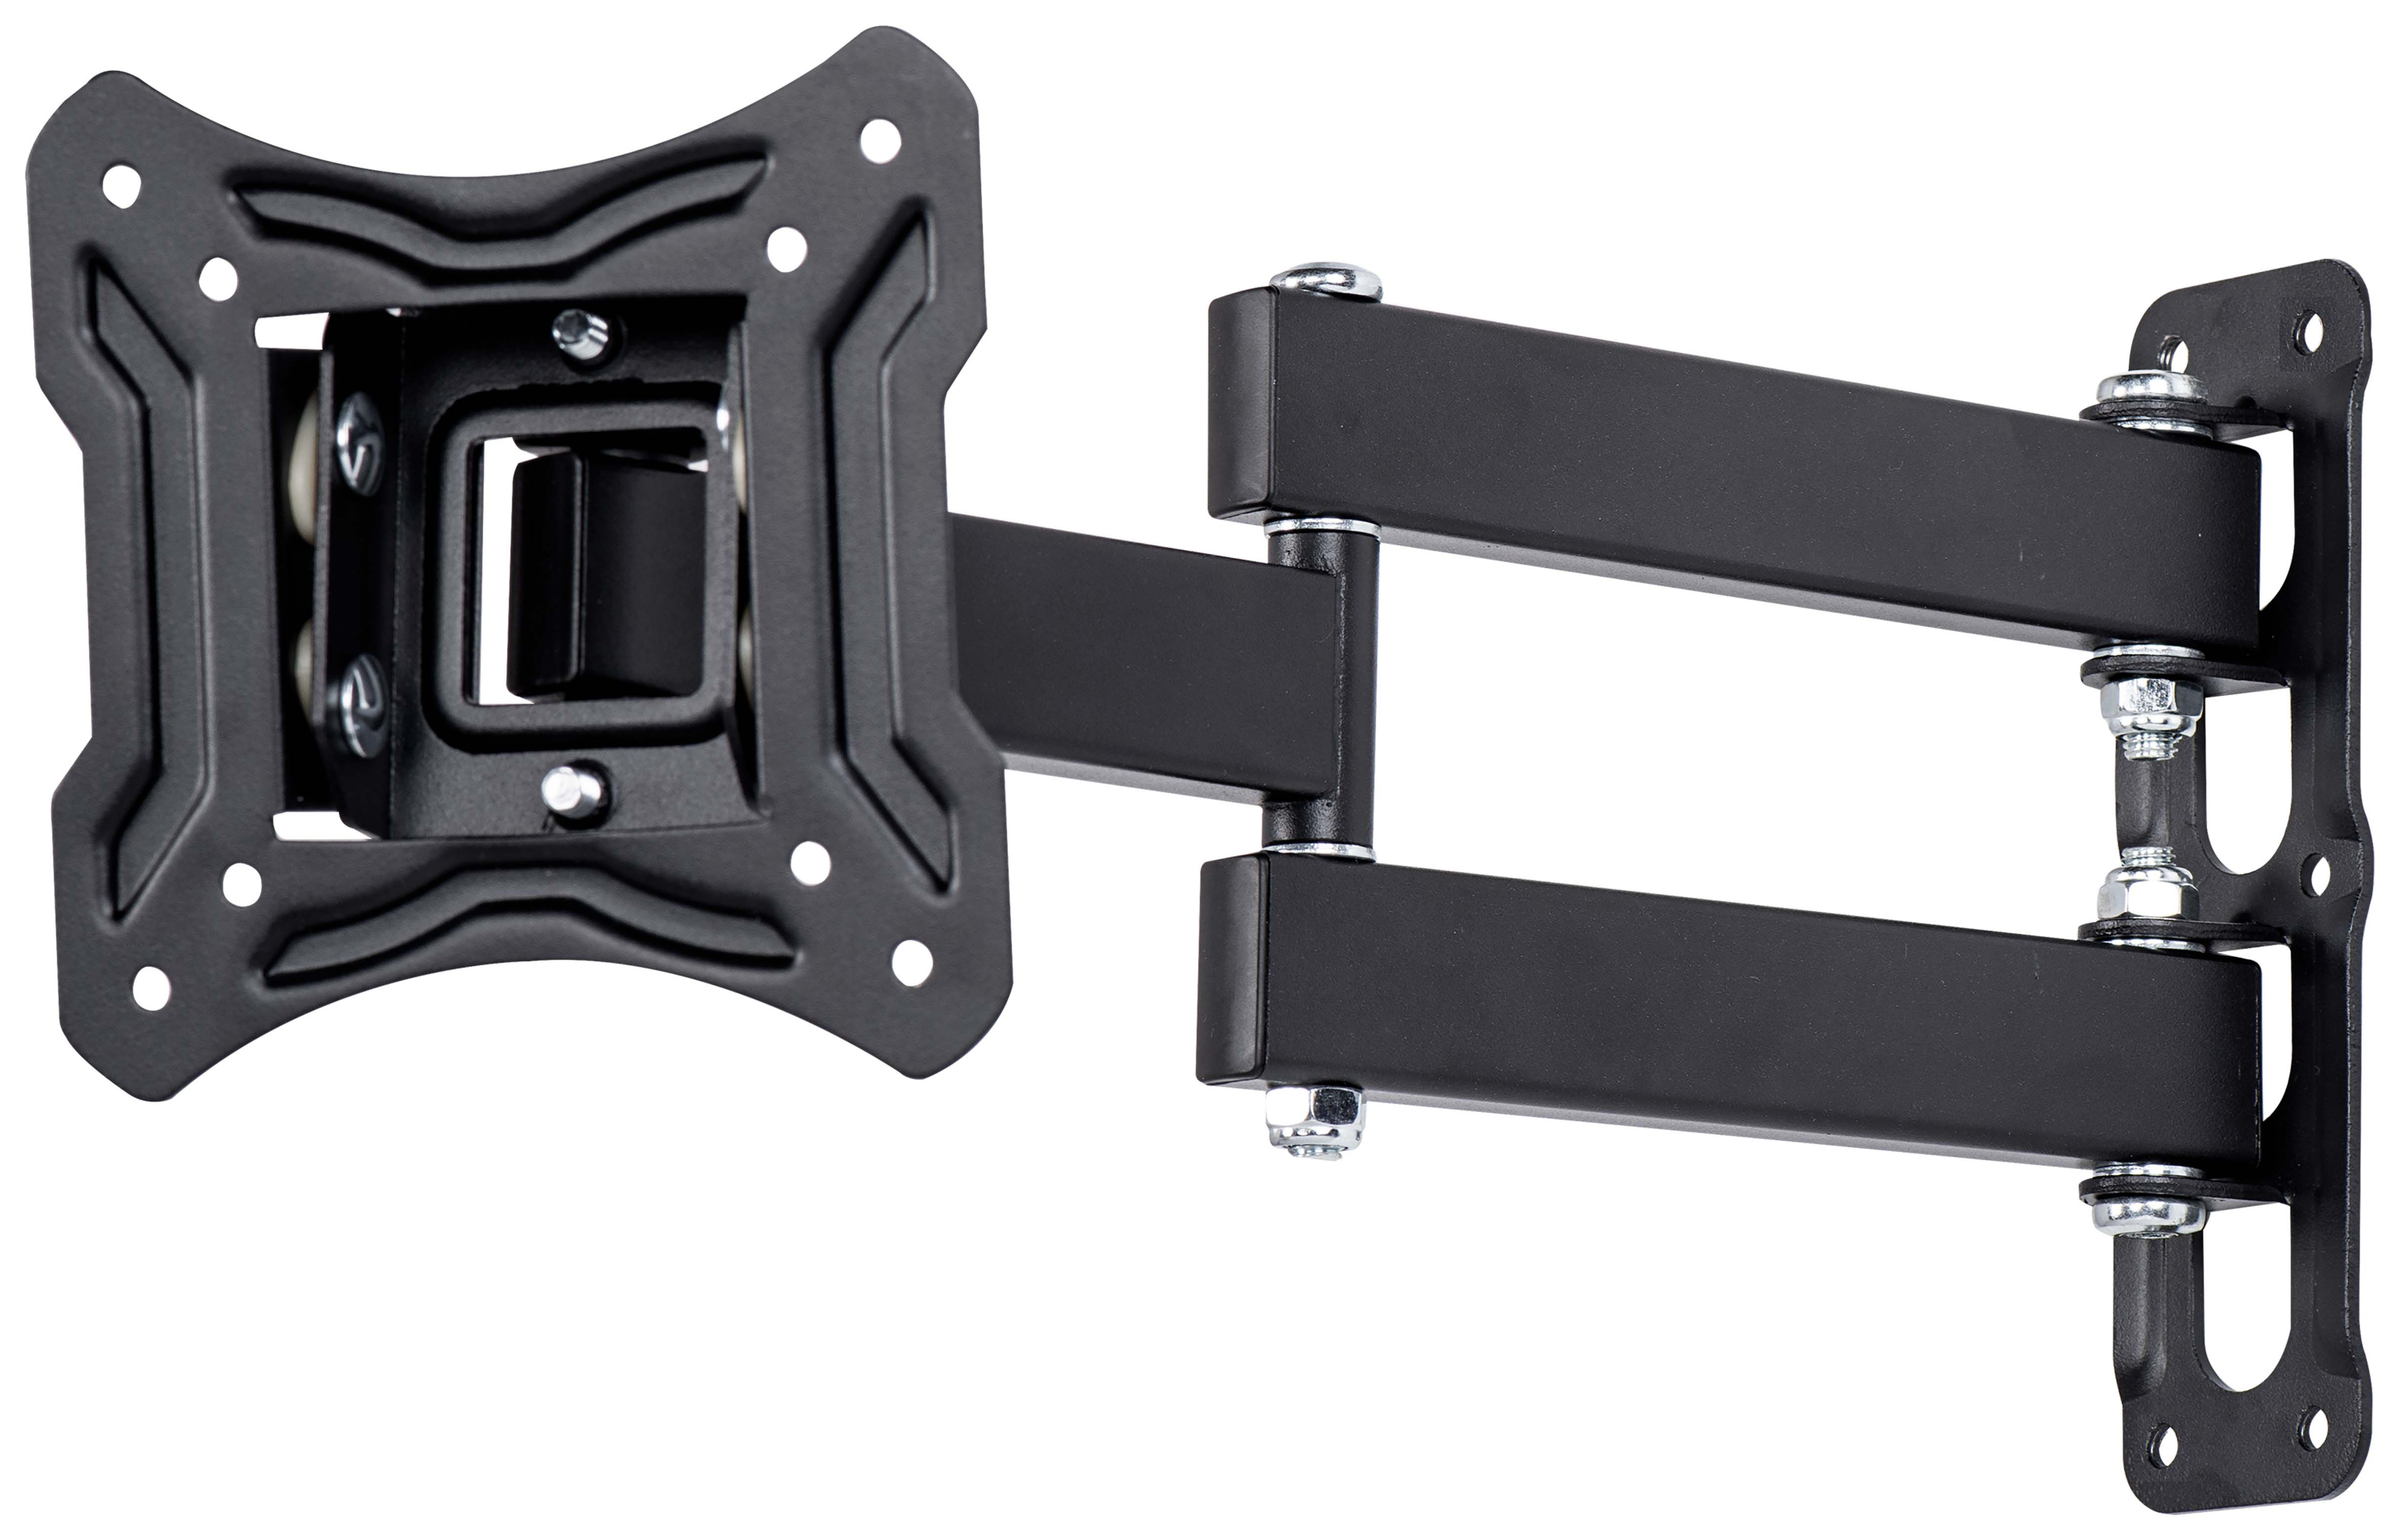 Image of Ross Essentials 100 Vesa Full Motion TV Wall Mount Bracket - 13in to 23in